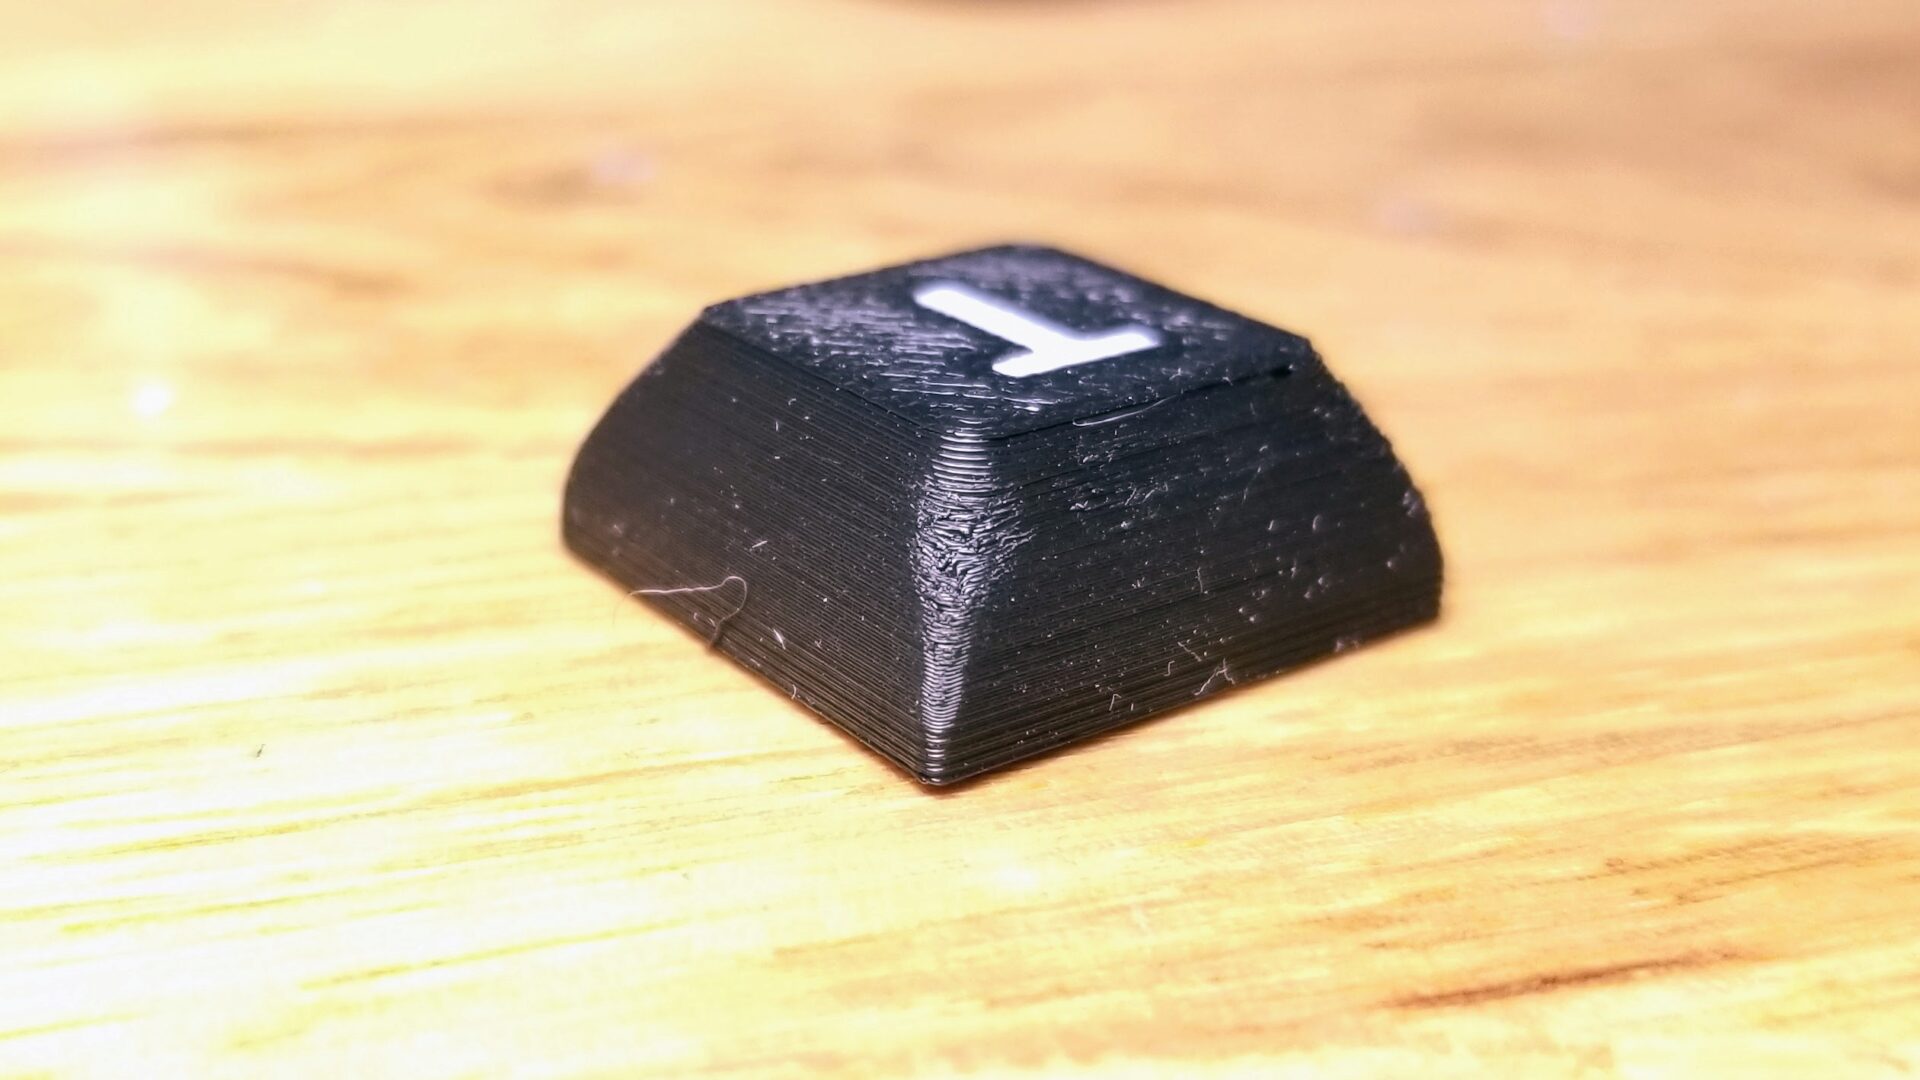 Keycap imperfections